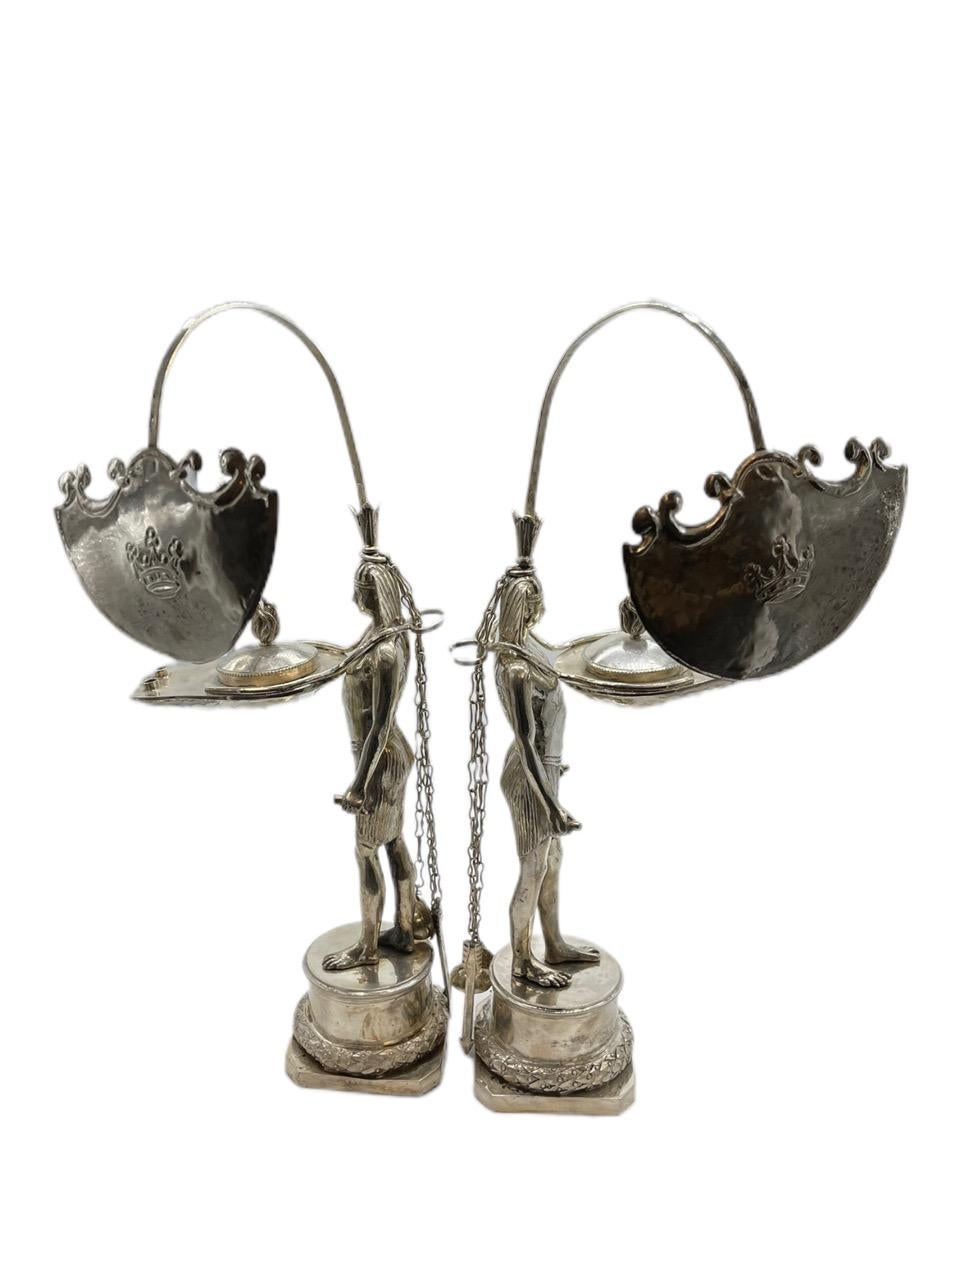 Pair of Early 19th Century Italian Antique Silver Oil Lamps by Vincenzo Belli II For Sale 2